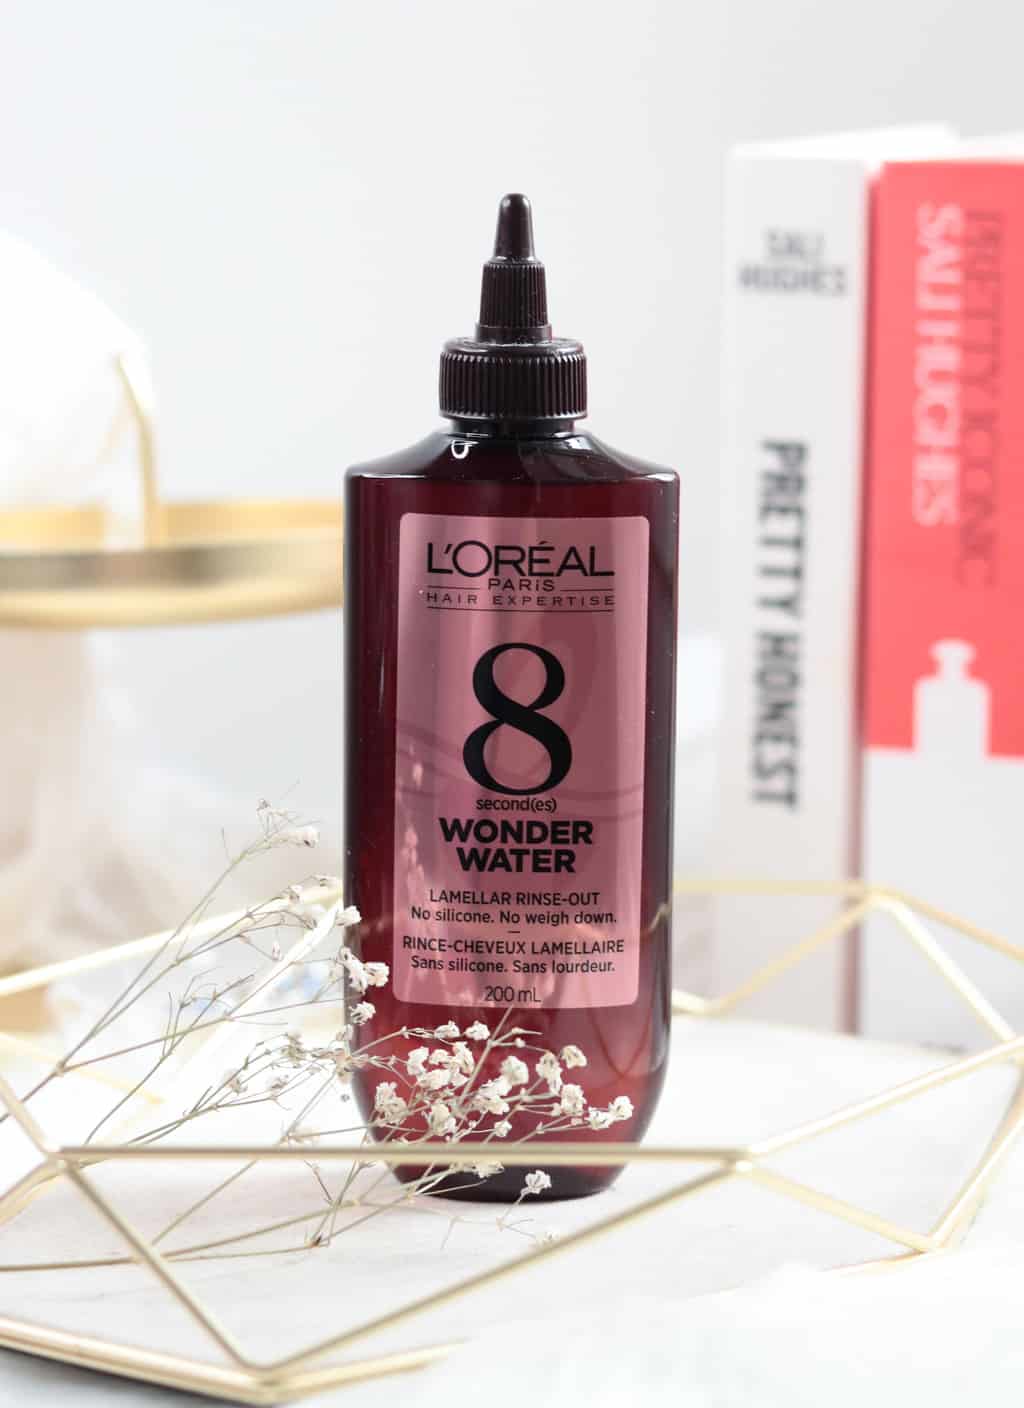 L'Oreal 8 Second Wonder Water Review